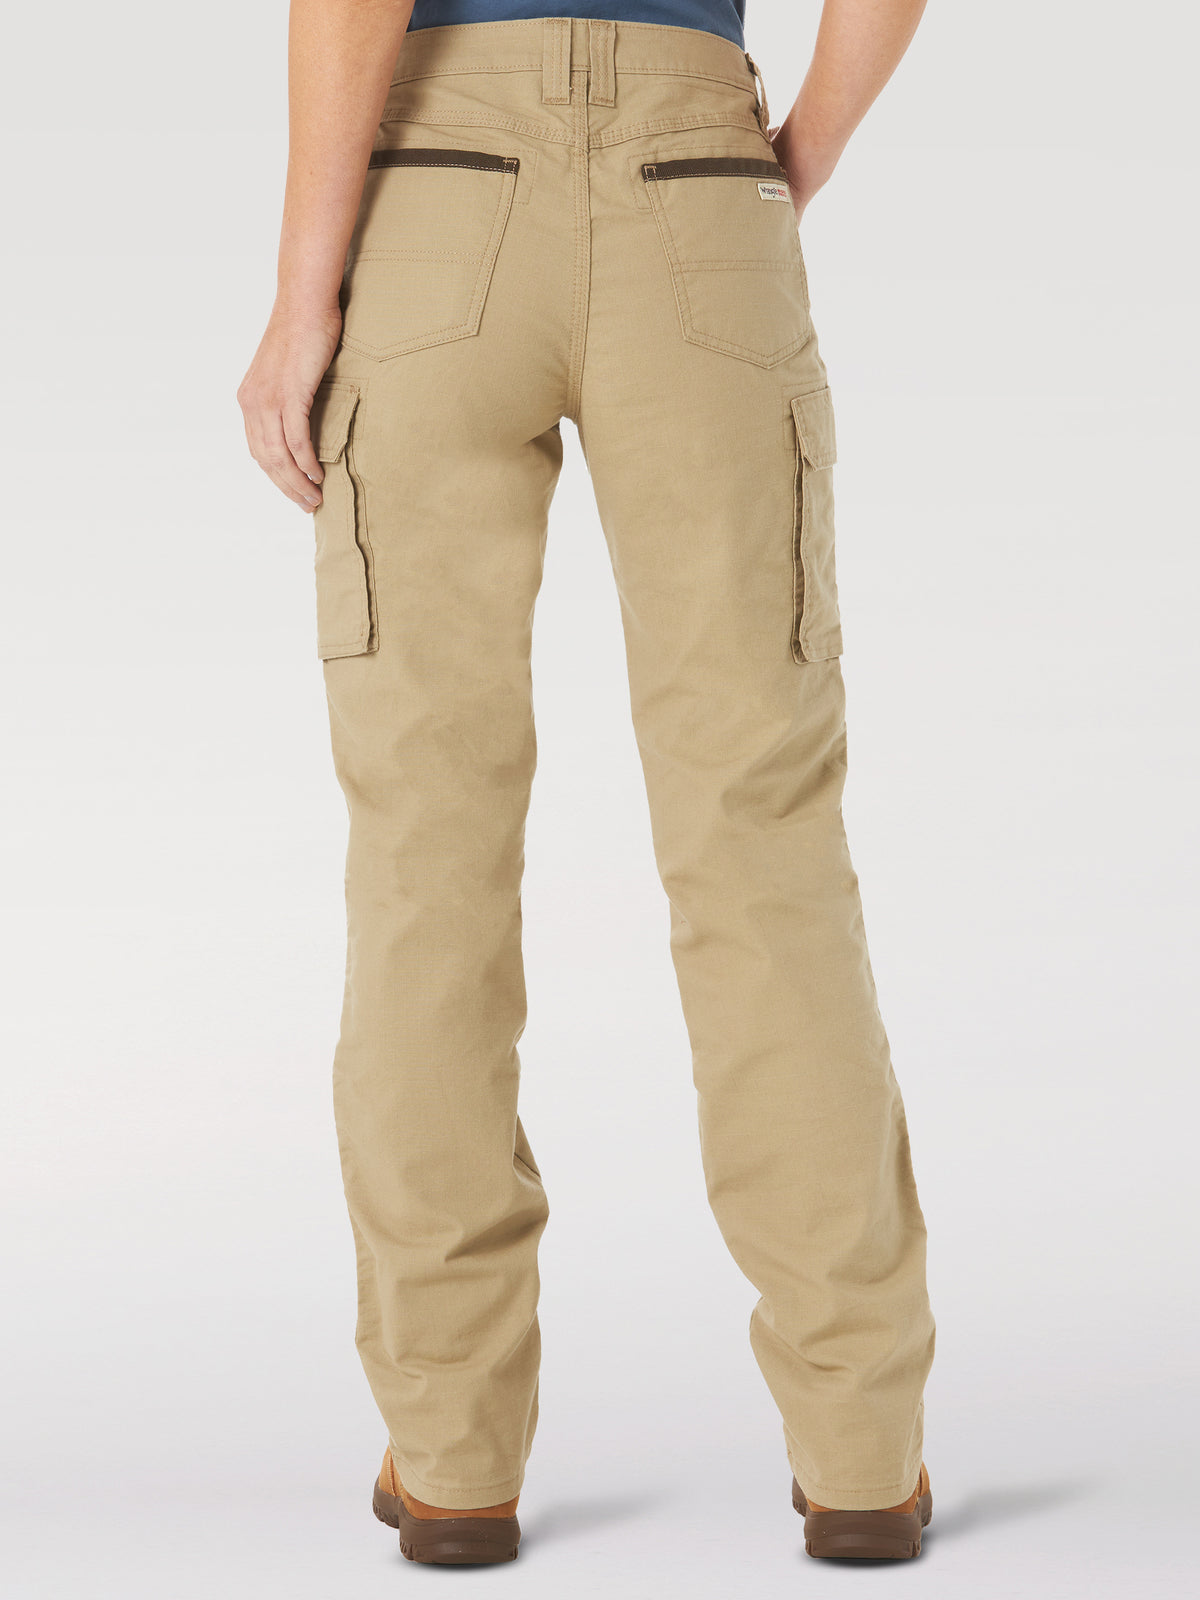 Wrangler RIGGS Workwear® Women&#39;s Ranger Double-Front Work Pant - Work World - Workwear, Work Boots, Safety Gear